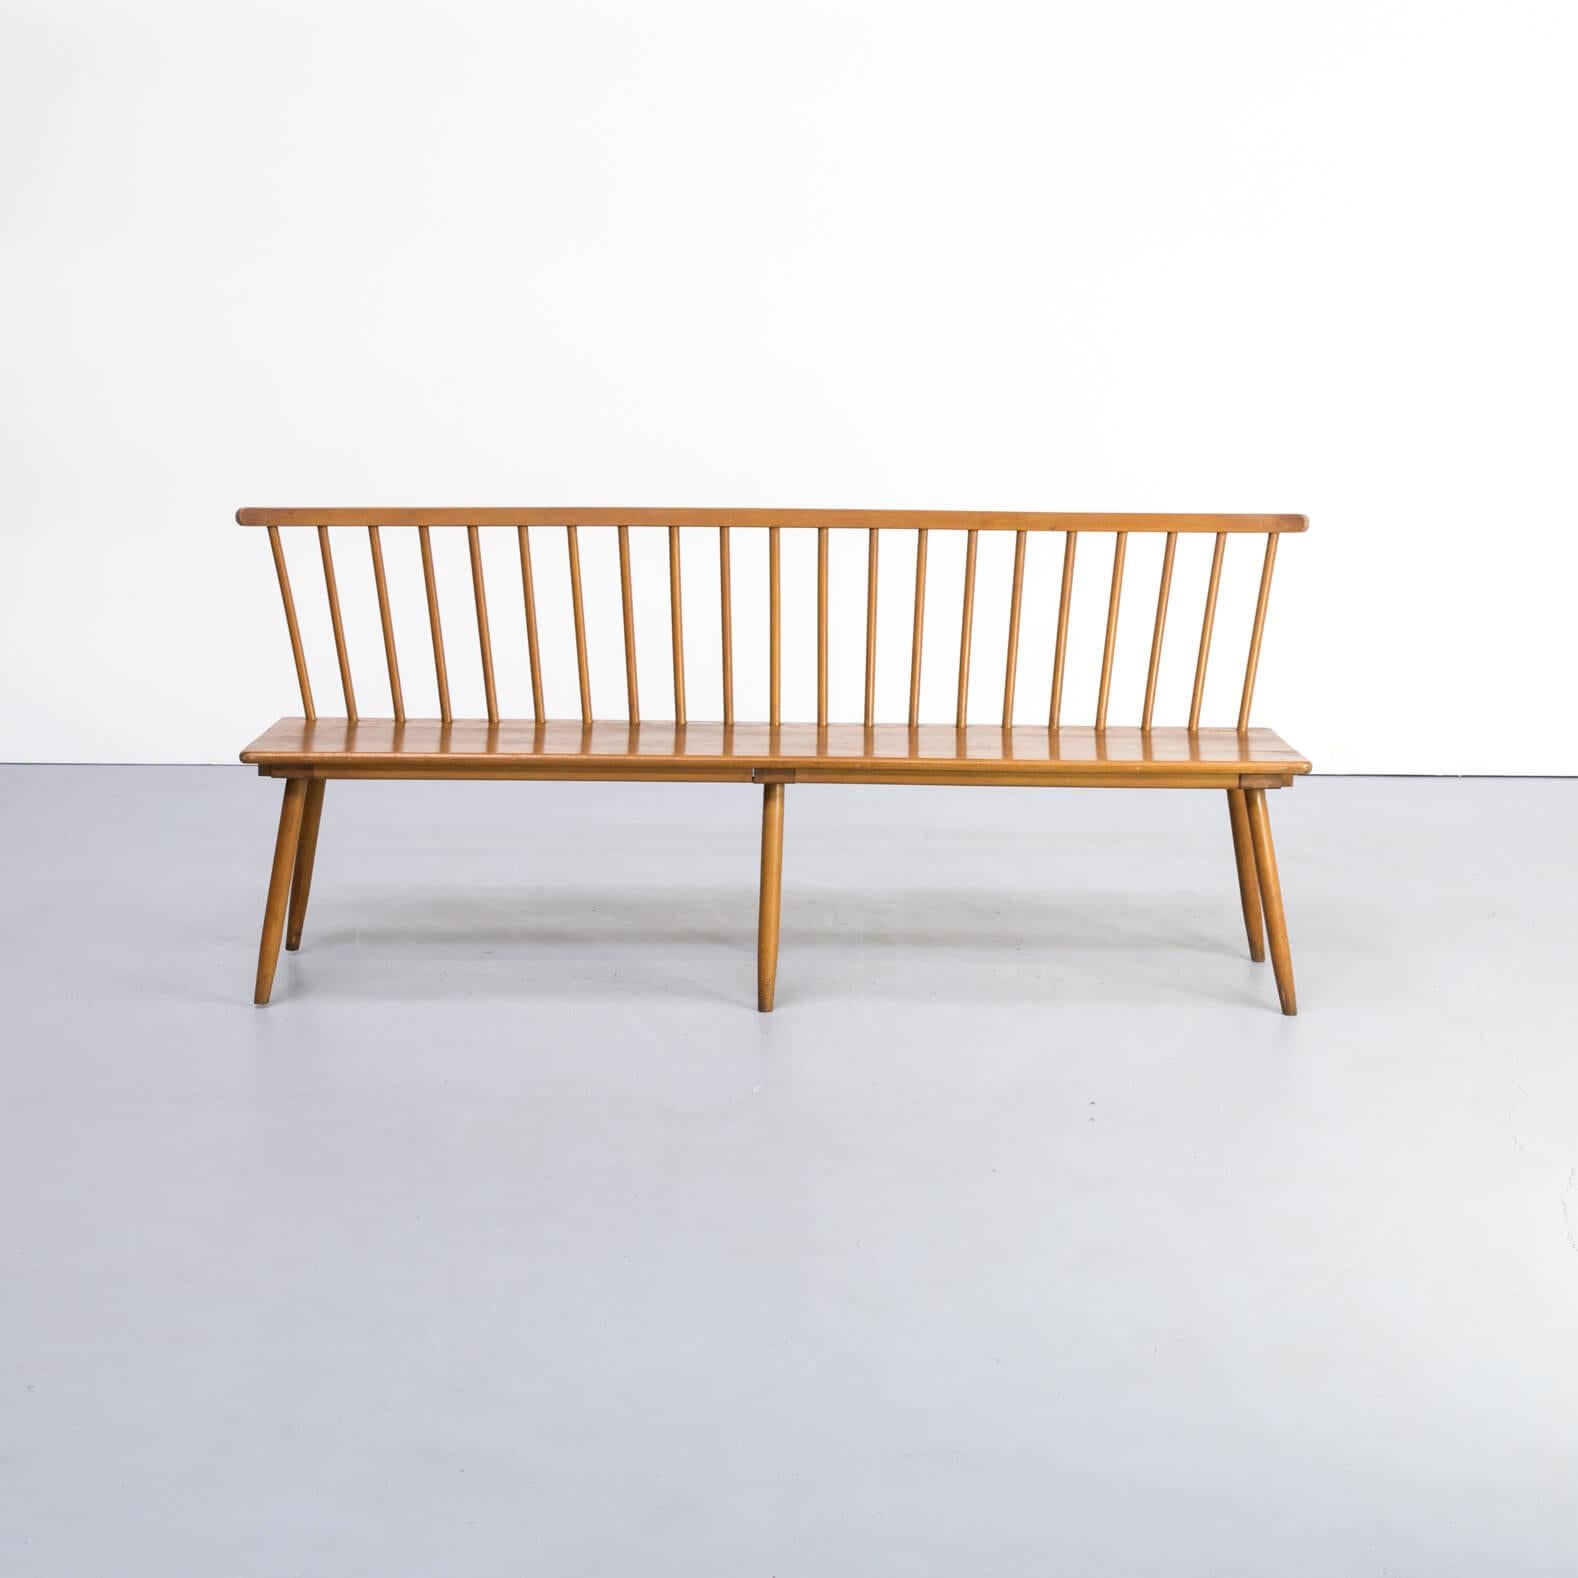 1960s wooden bench for Bund. Beautiful long wooden bench with a backrest inspired on the Tapiovaara use of wooden bars. Good condition consistent with age and use.